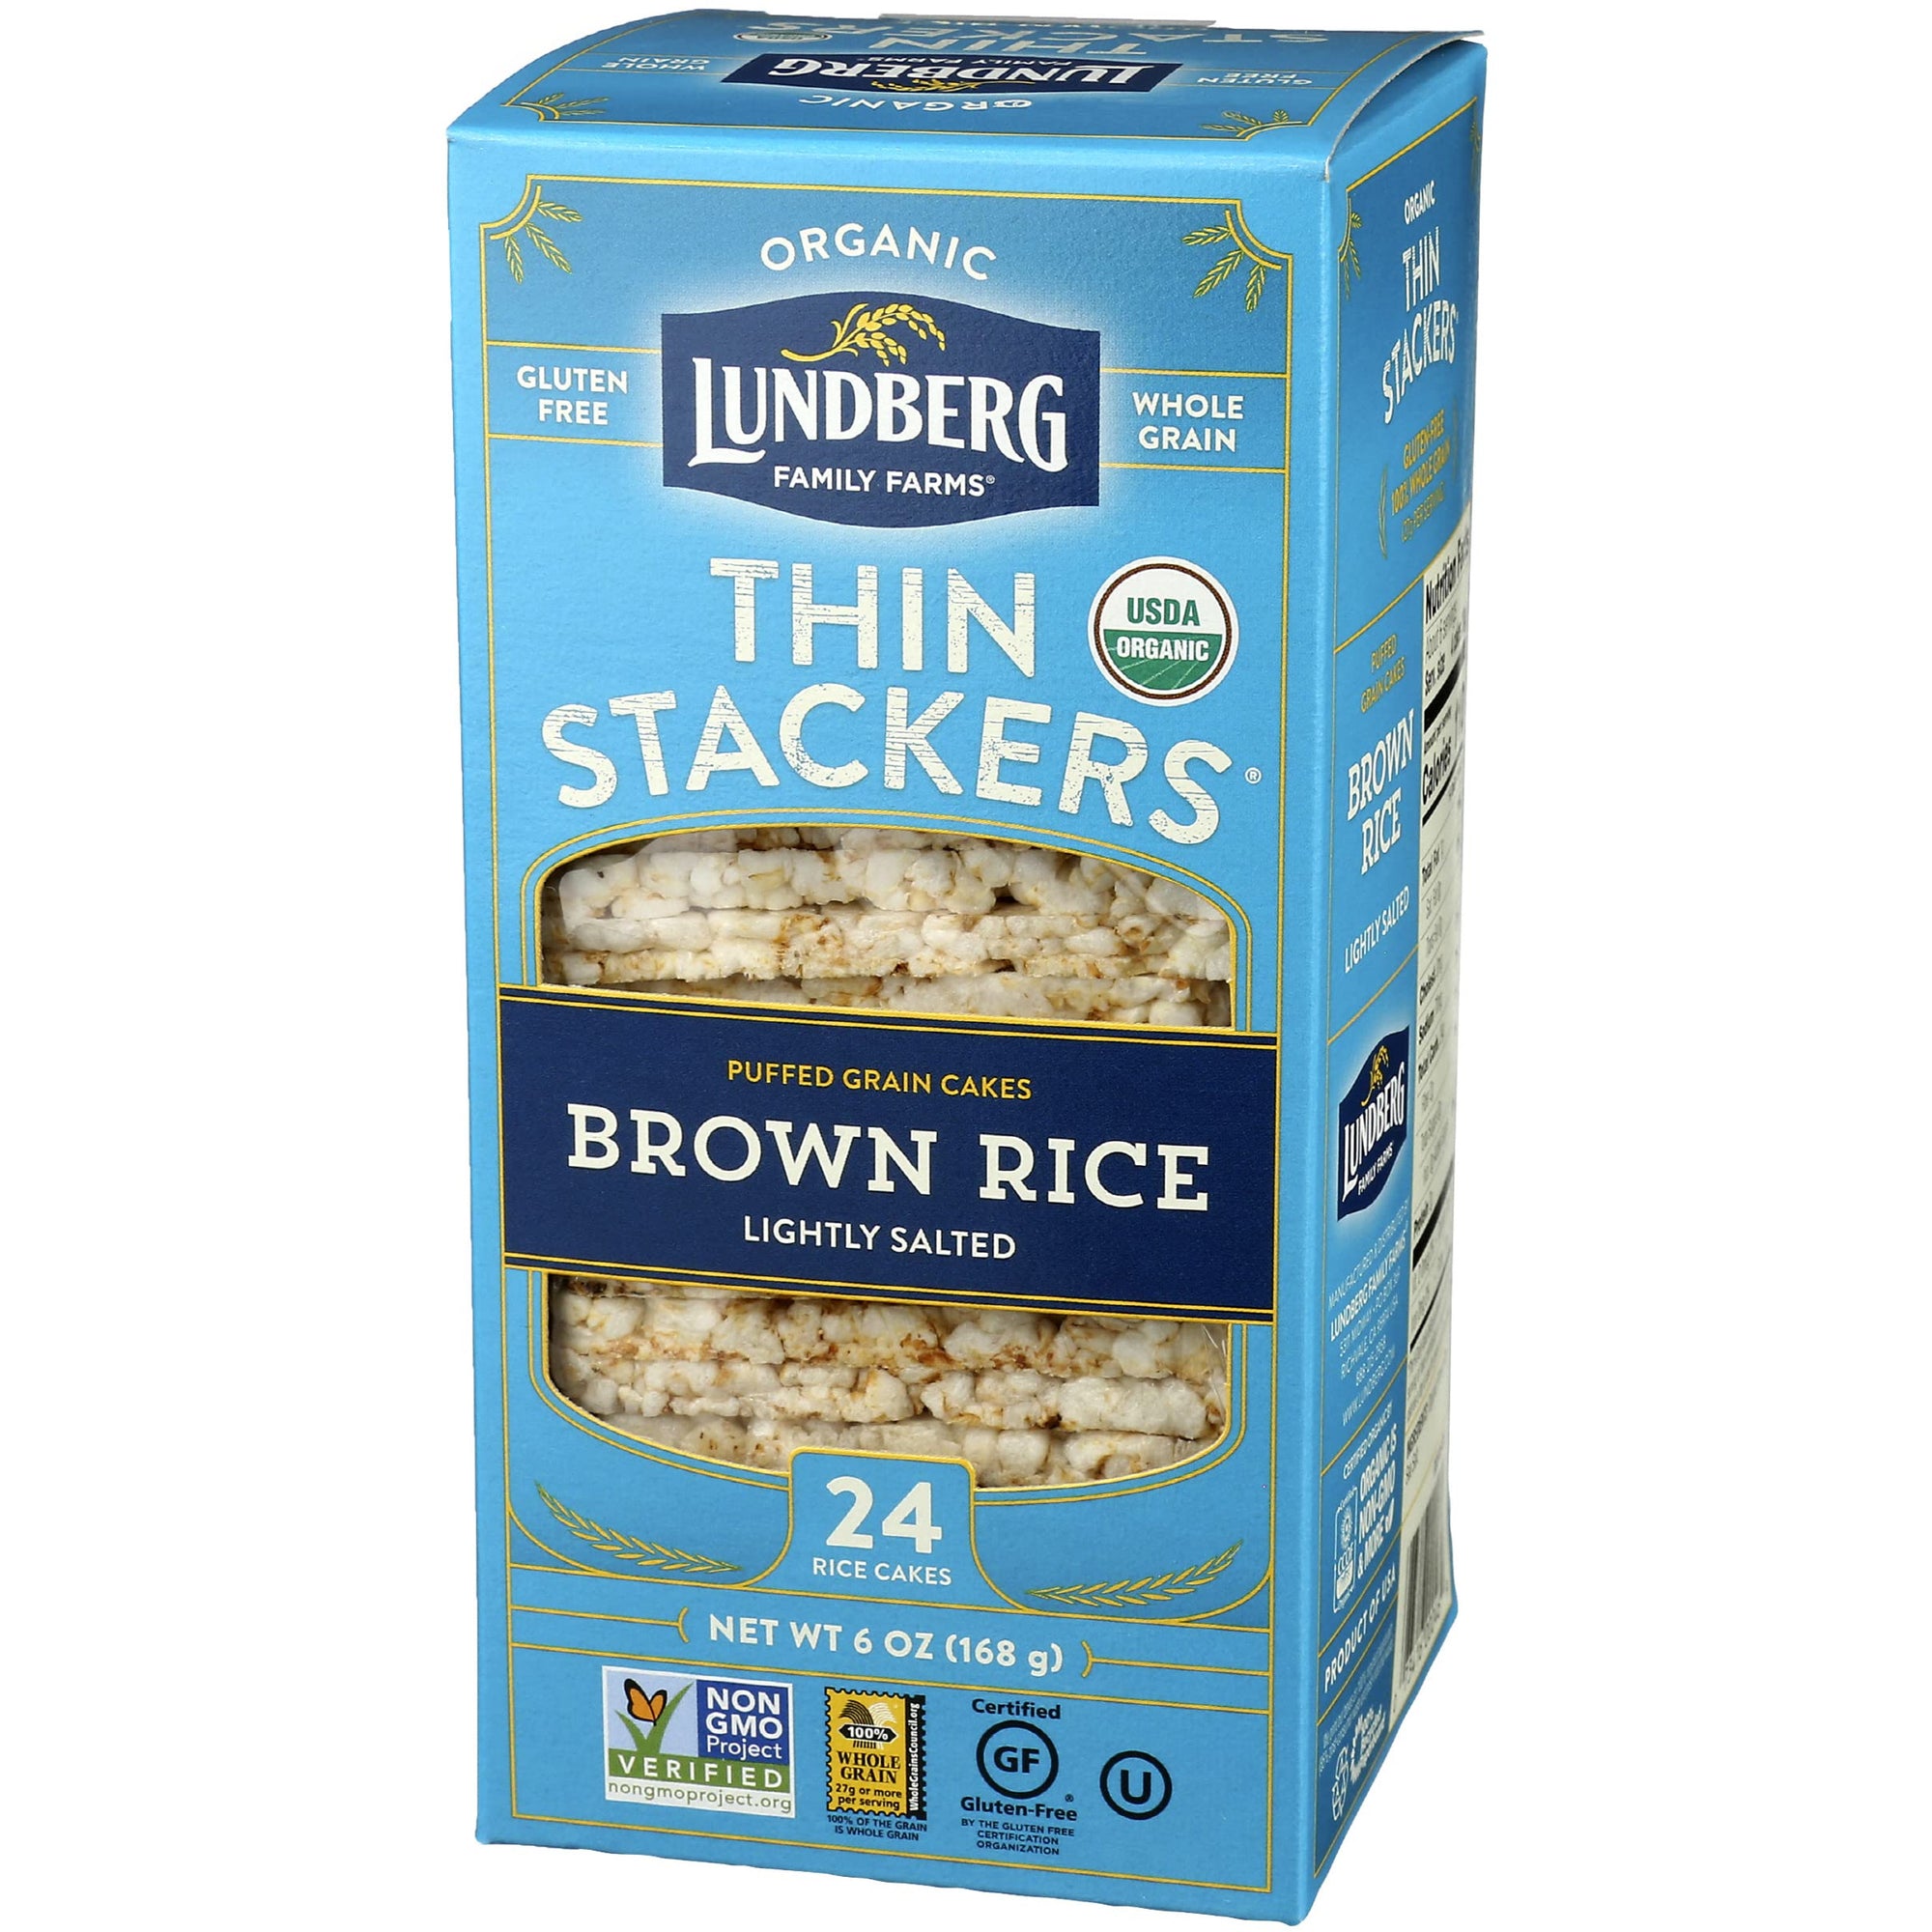 Lundberg Thin Stackers Brown Rice Lightly Salted, 6 Oz